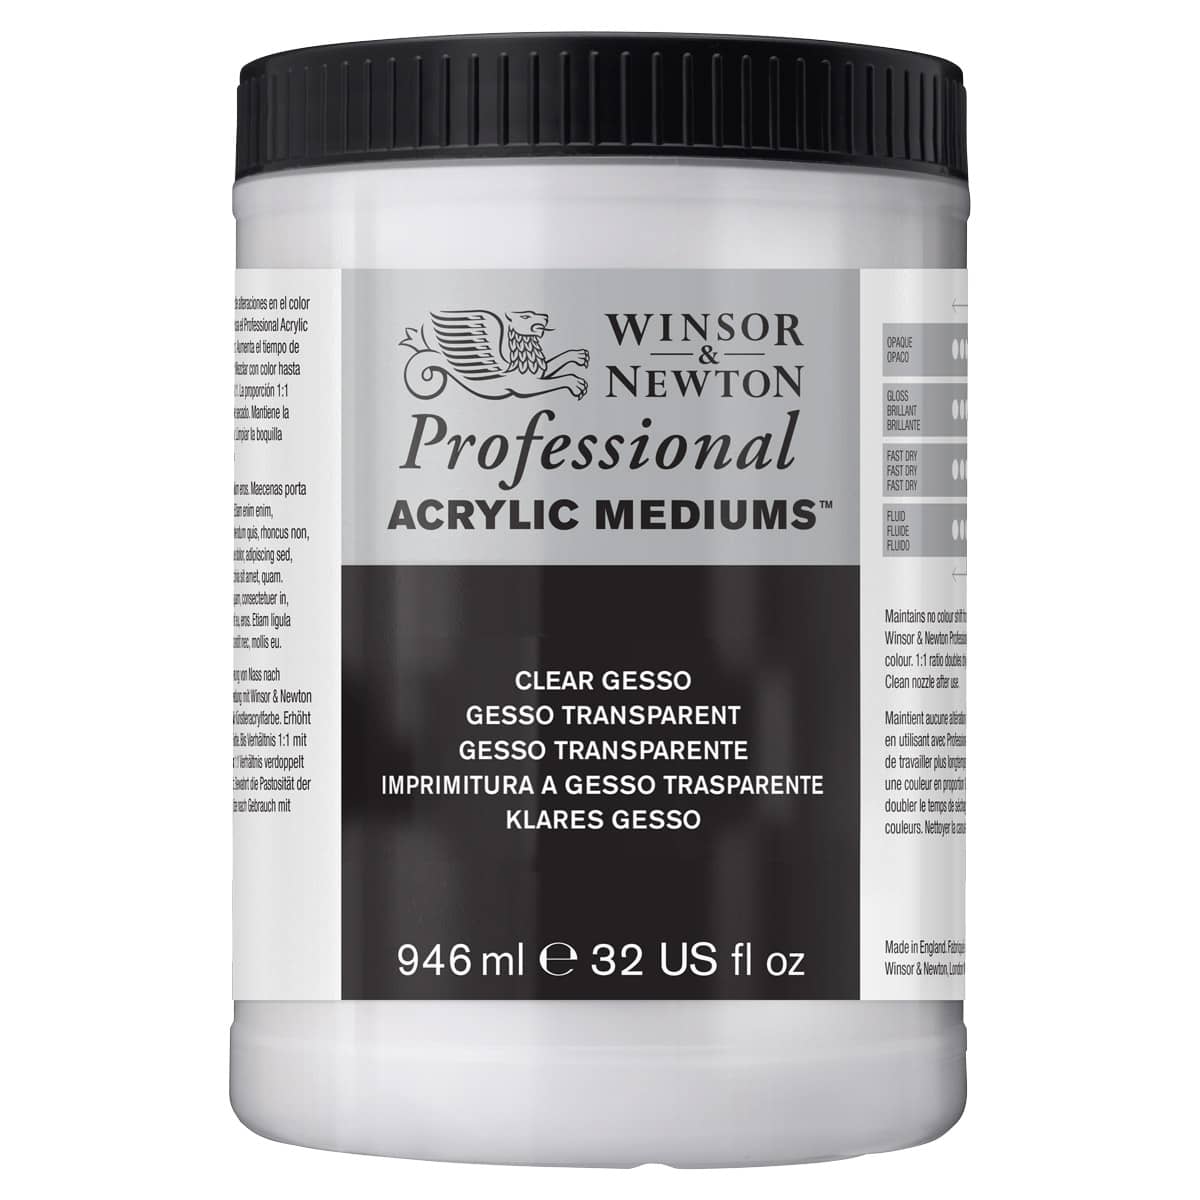 Jerry's World's Greatest White Acrylic Artist Gesso Primer